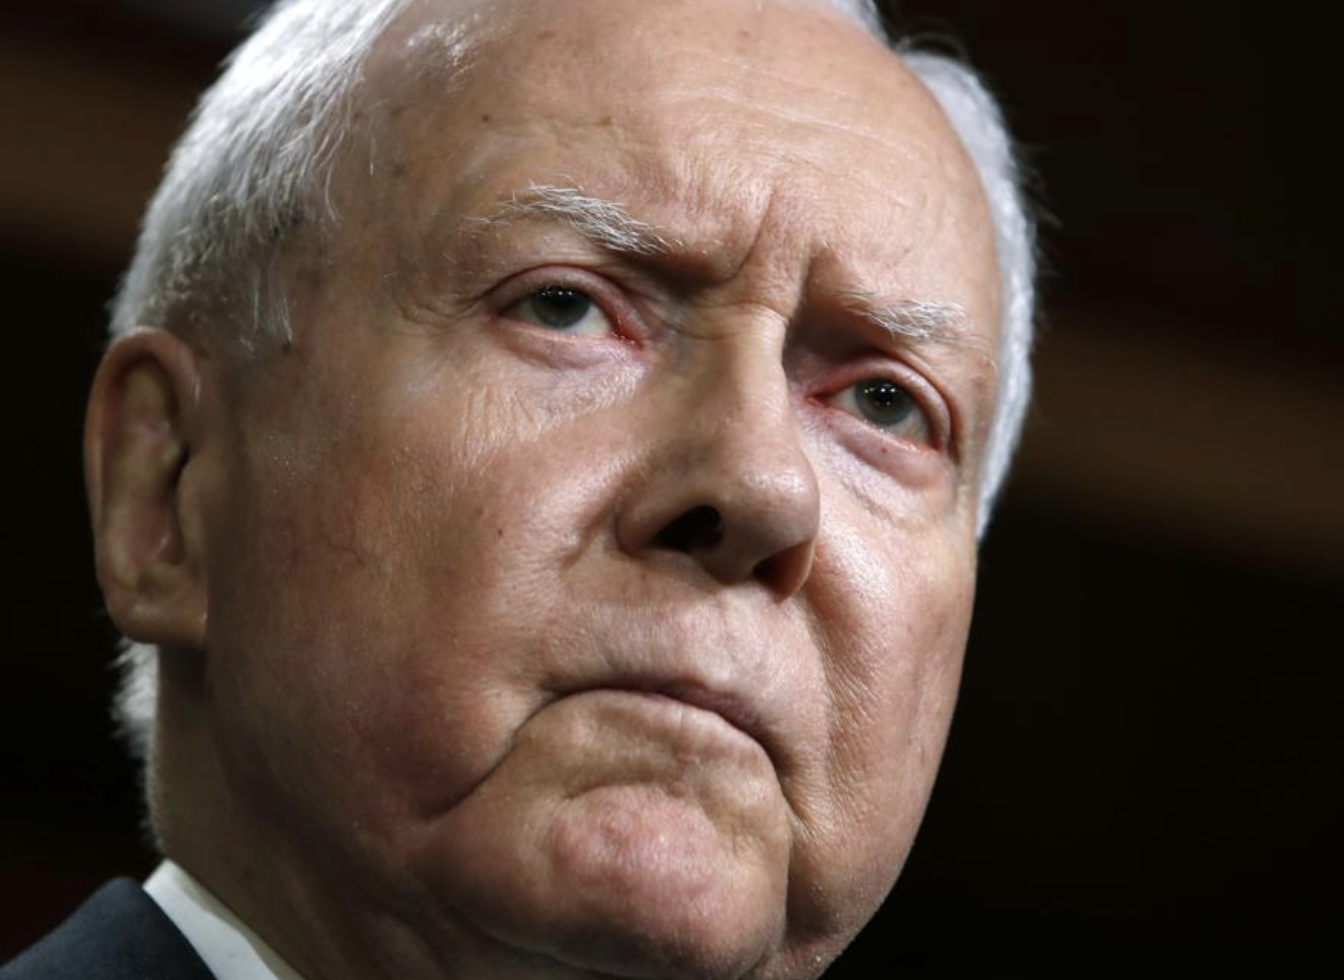 Sen. Orrin Hatch, R-Utah, attends a news conference with Republican members of the Senate Judiciary Committee on Capitol Hill in Washington on Oct. 4, 2018. A longtime senator known for working across party lines, Hatch died Saturday, April 23, 2022, at age 88. (AP Photo/Jacquelyn Martin, File)